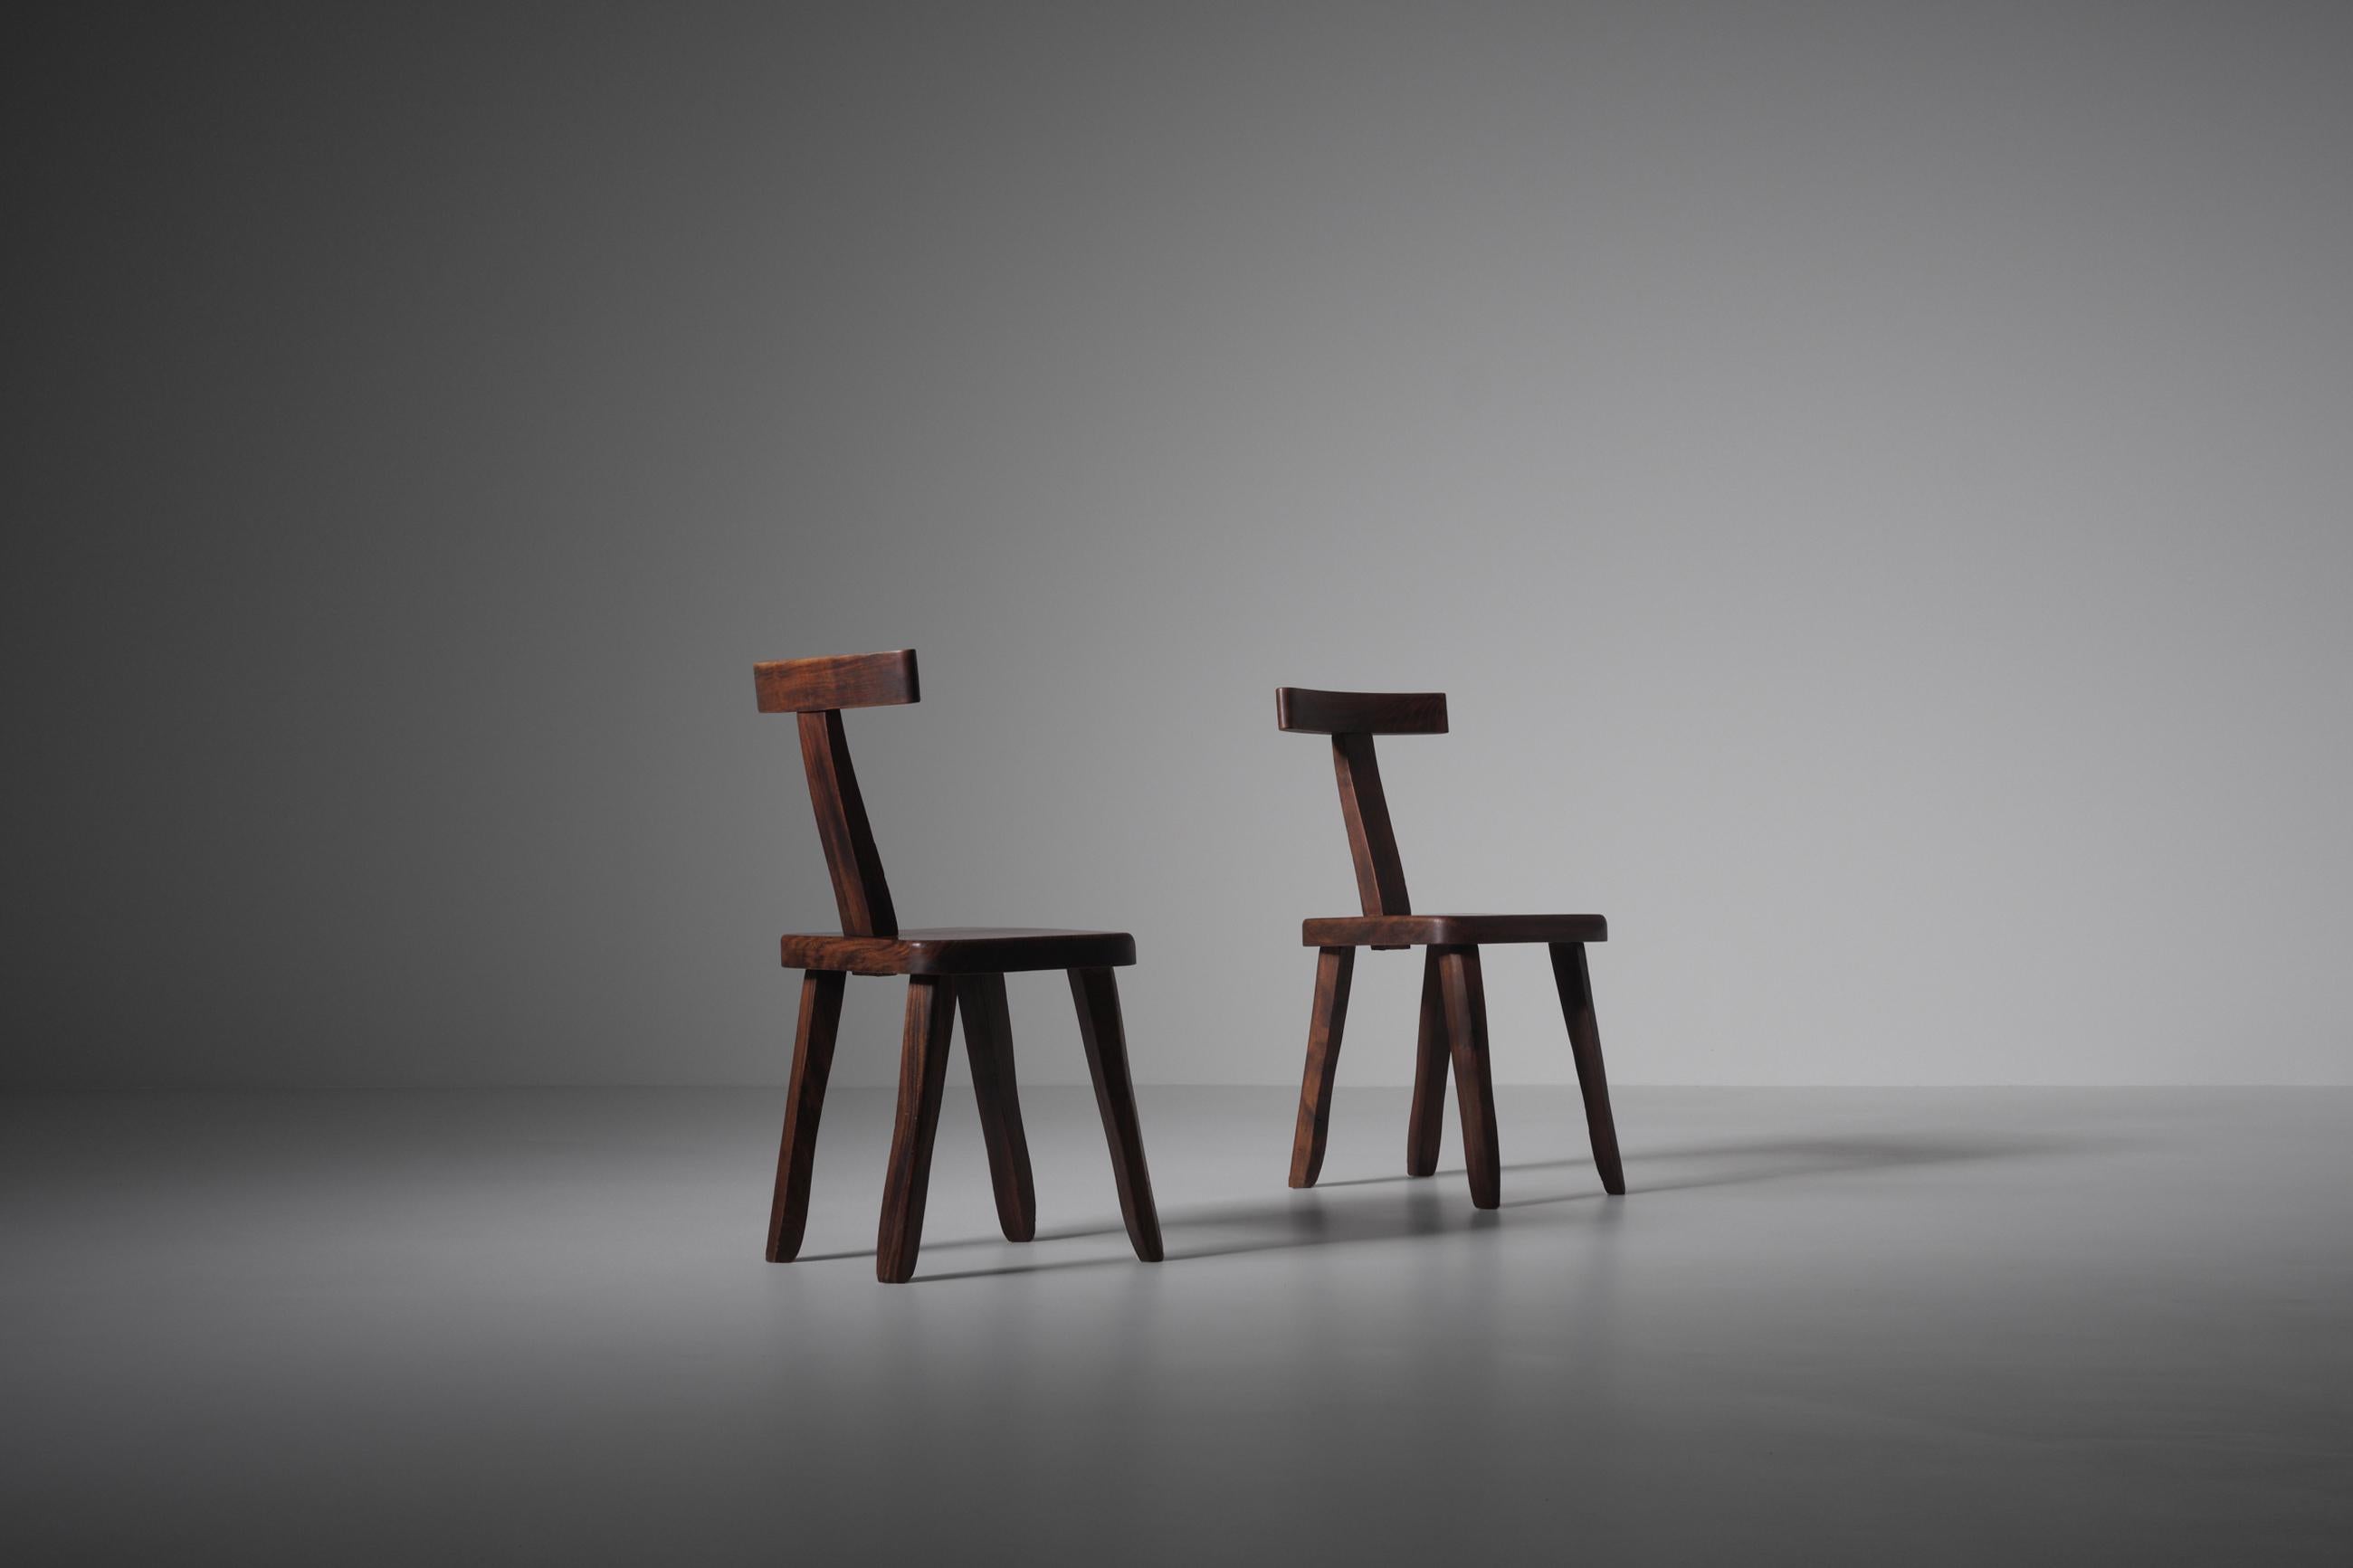 Set of two sculptural side chairs often attributed to Olavi Hänninen but actually a French production of the 60s. The chairs are constructed out of dark stained Elm wood with nice warm tones. Every single element of the chairs is carved by hand,